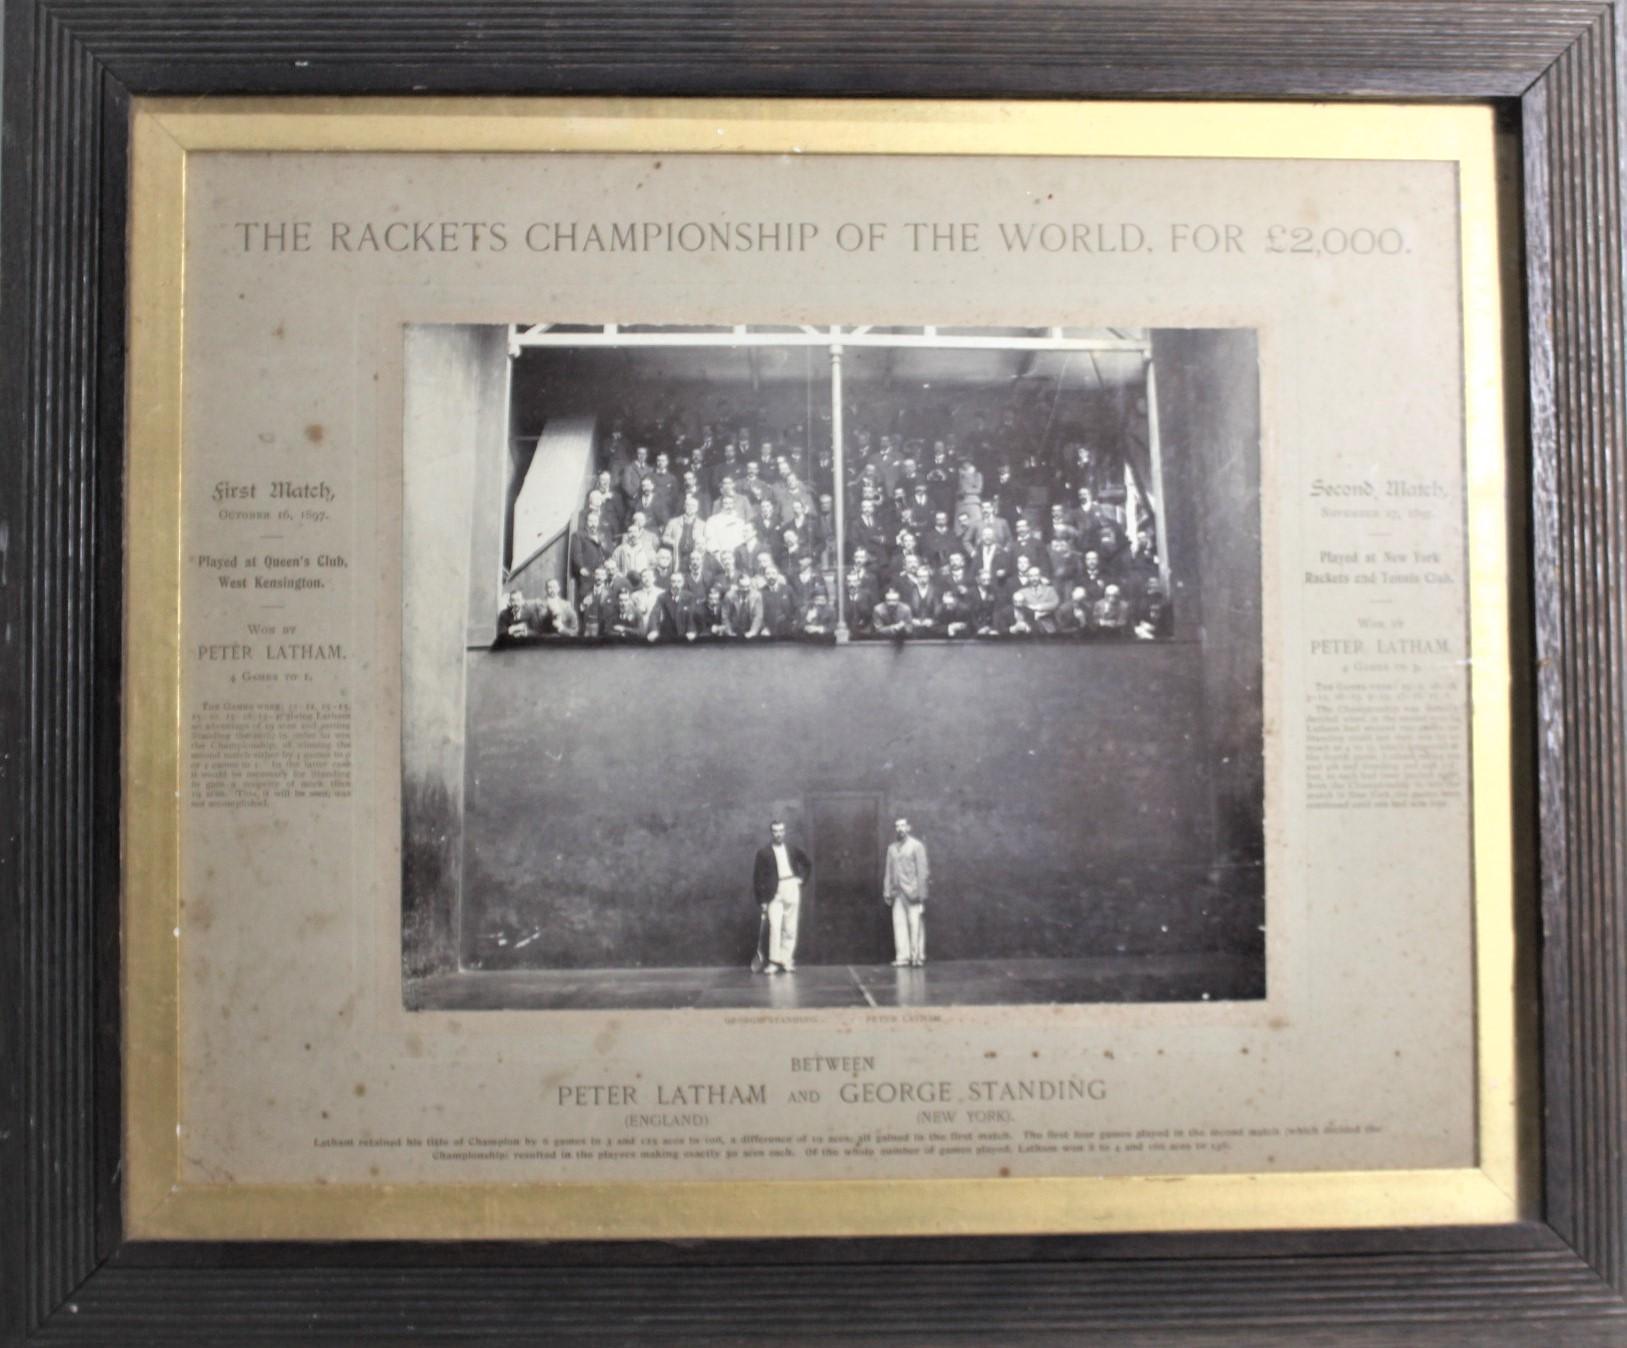 This framed and matted antique photograph was done by the Thomas Bromley Fine Art Gallery of England in approximately 1905 in the period Edwardian style. The photograph commemorates the racquet matches which took place in England and the United